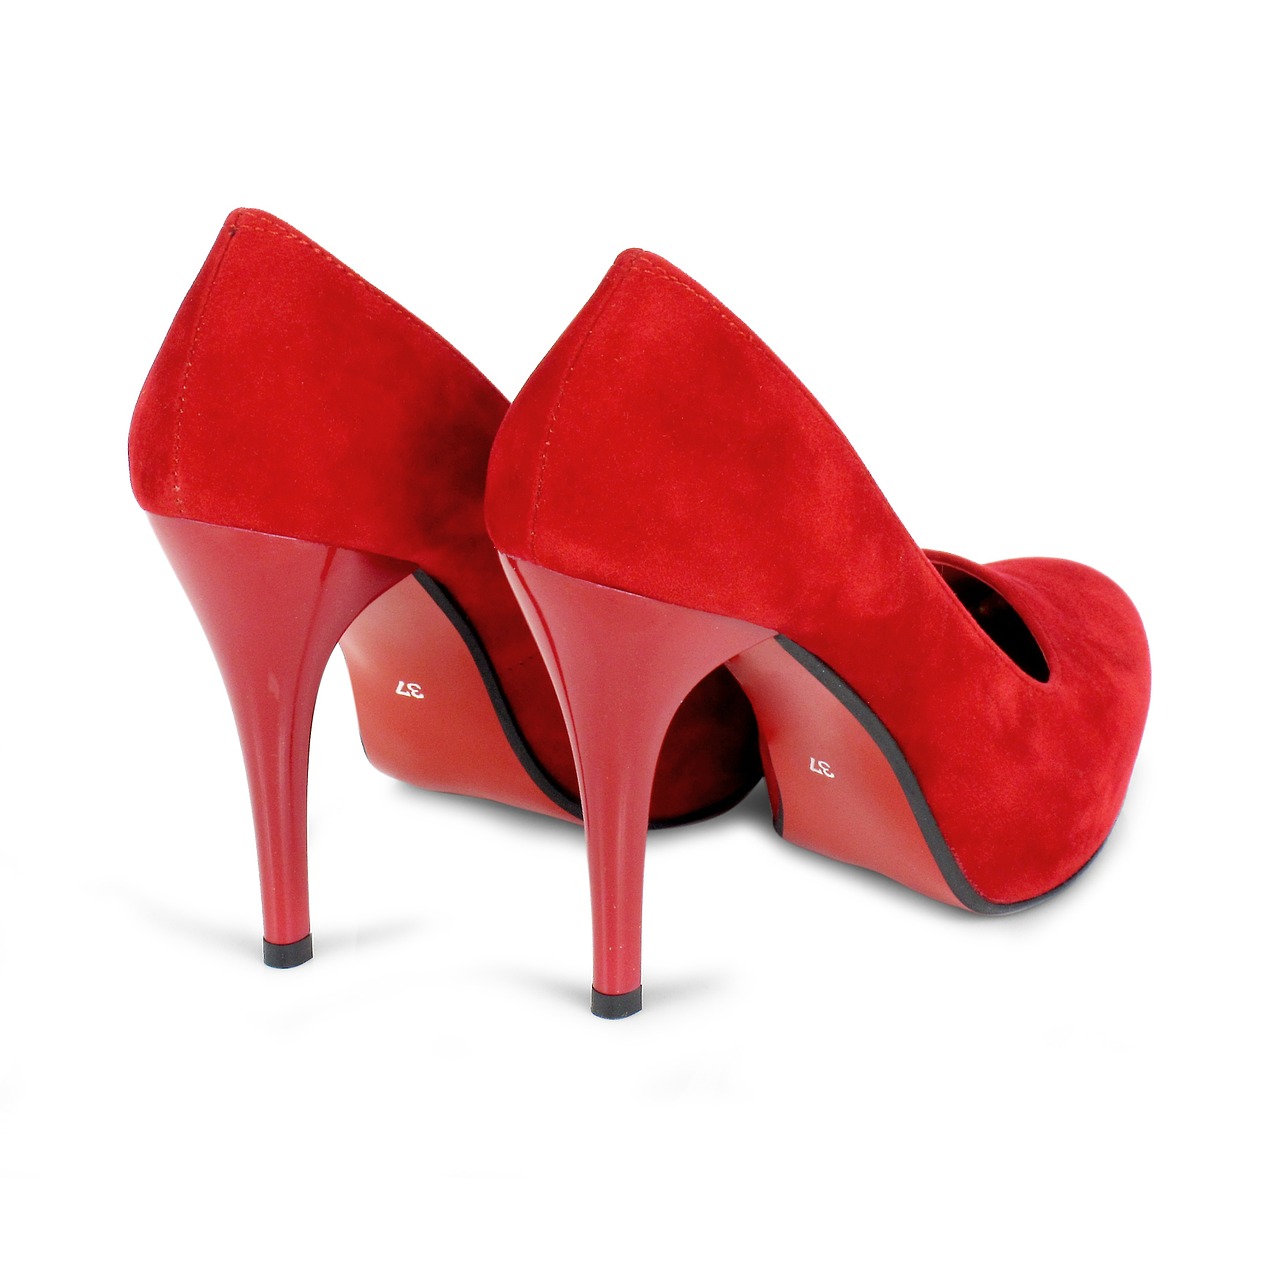 women's shoes red pin free photo